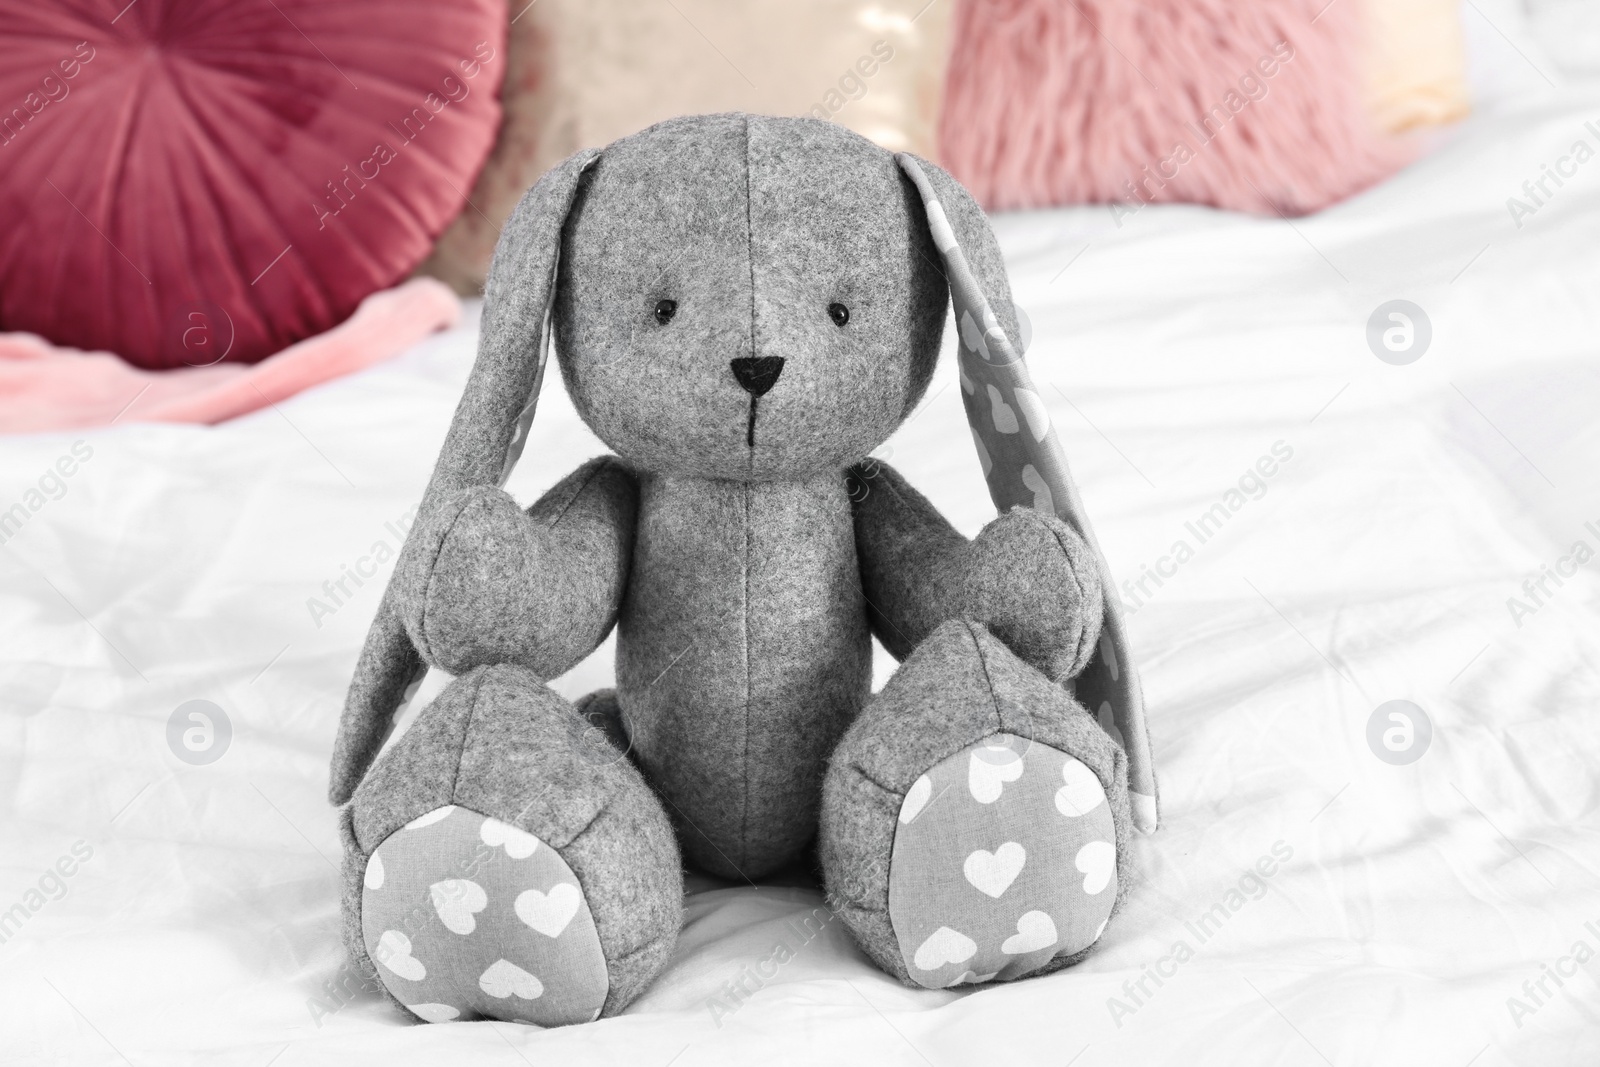 Photo of Cute stuffed toy rabbit on comfortable bed in child's room interior